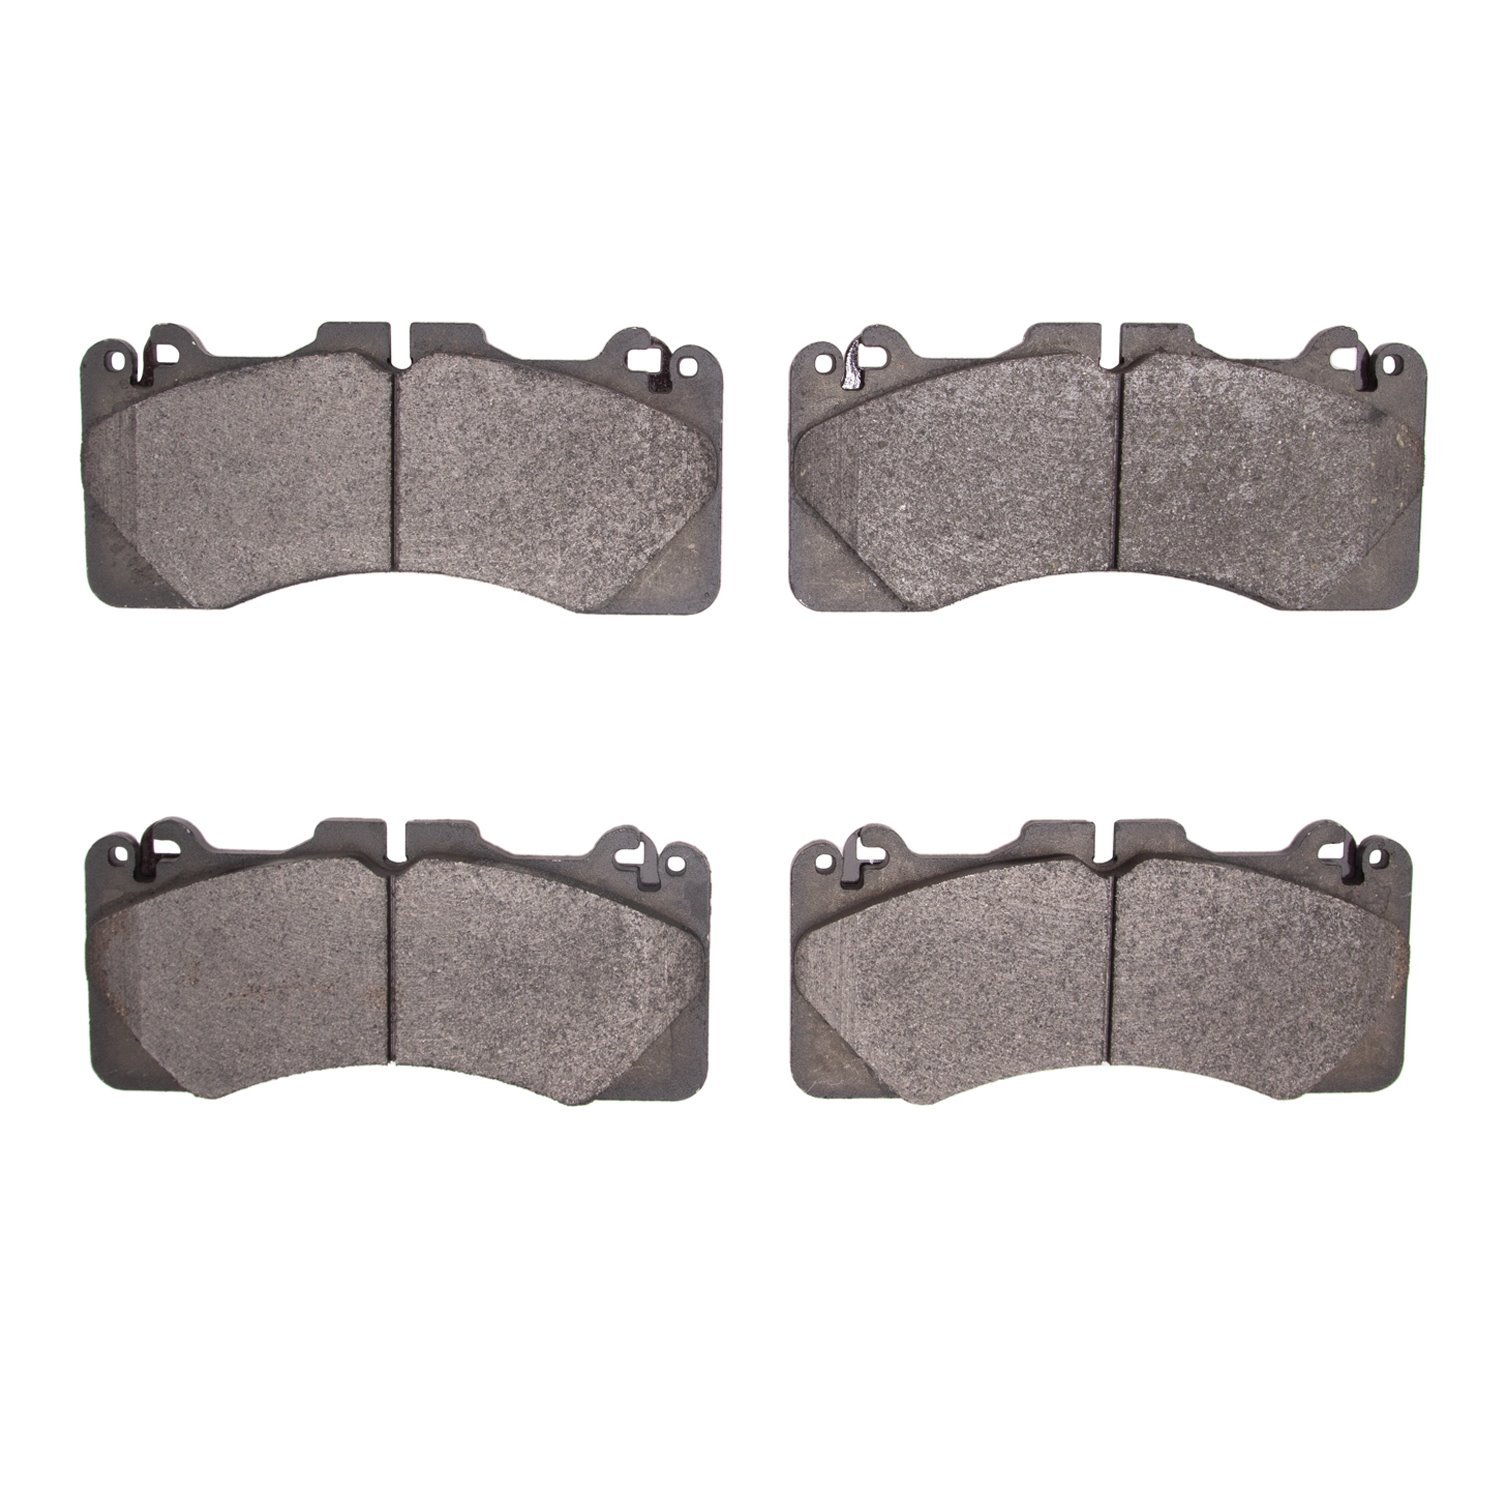 Track/Street Brake Pads, Fits Select Lexus/Toyota/Scion, Position: Front